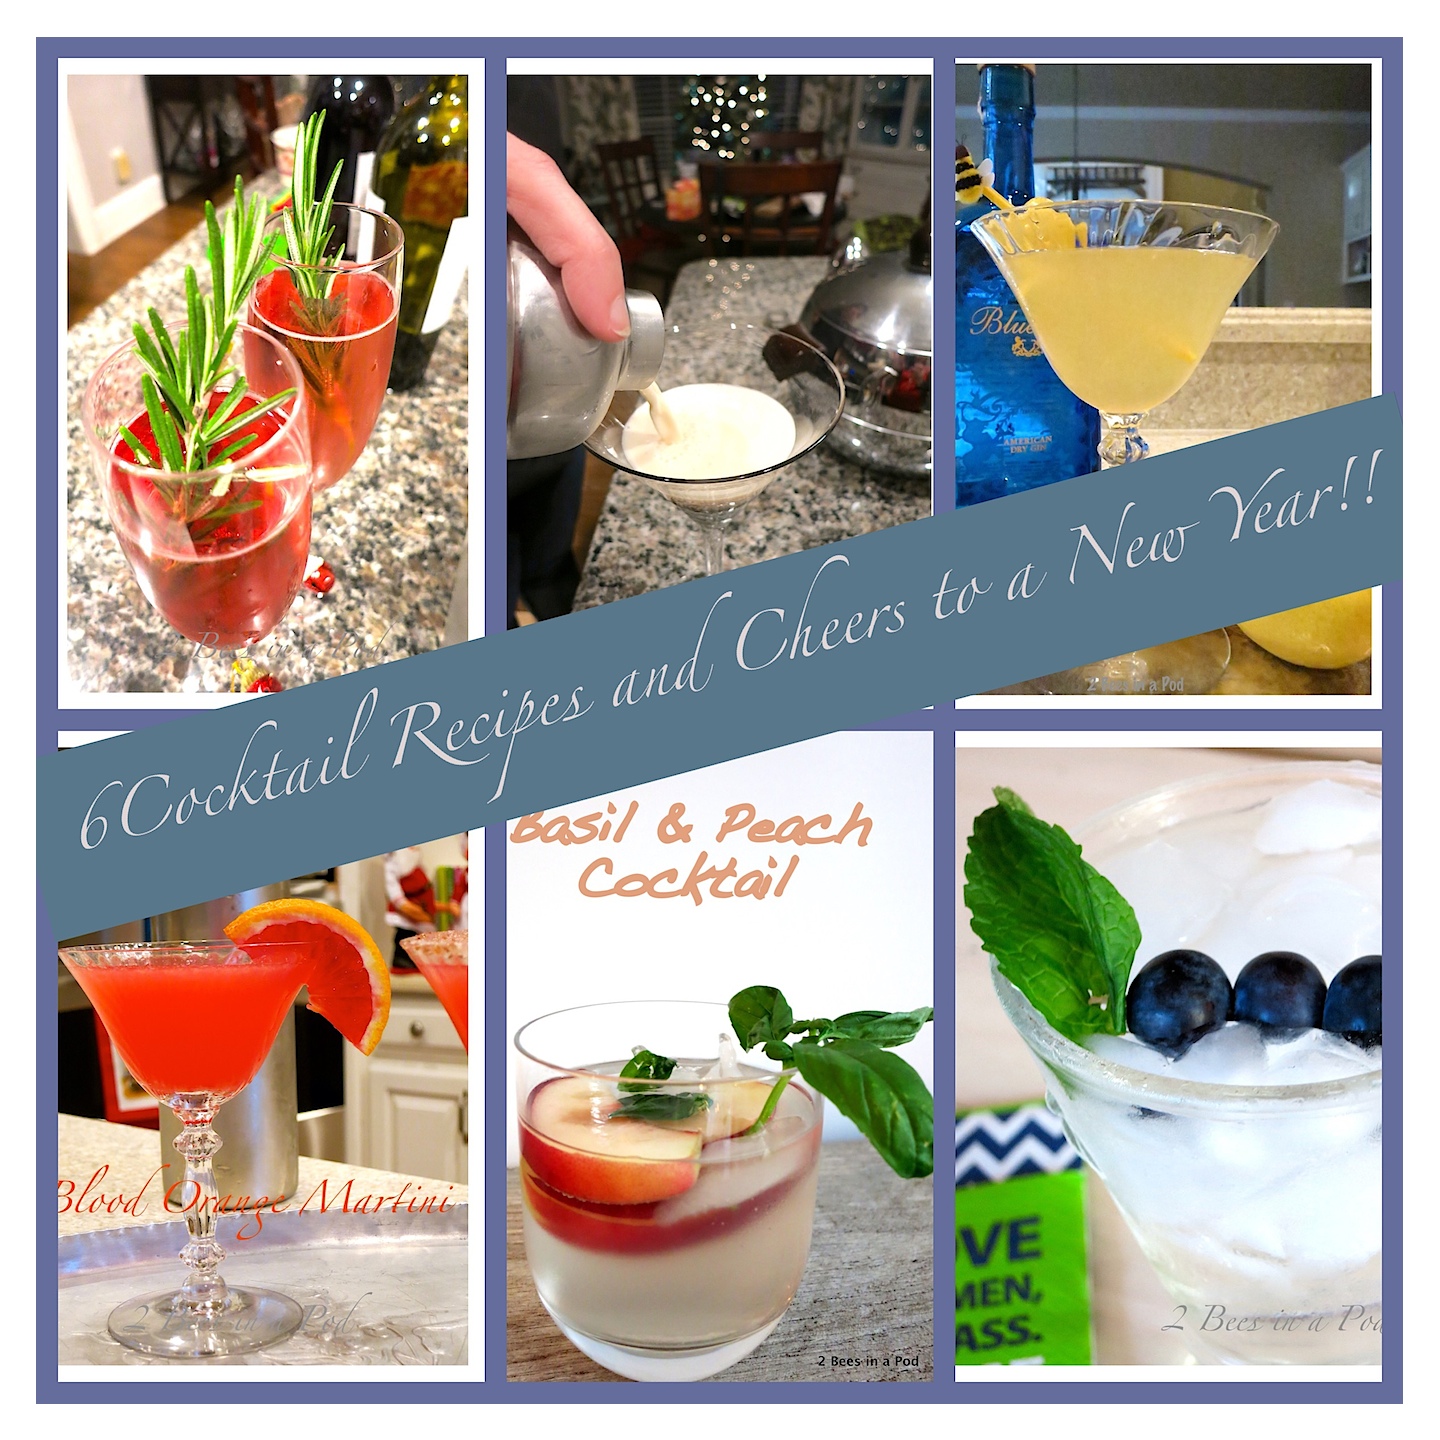 6 Cocktail recipes - perfect for holidays, gatherings or just because